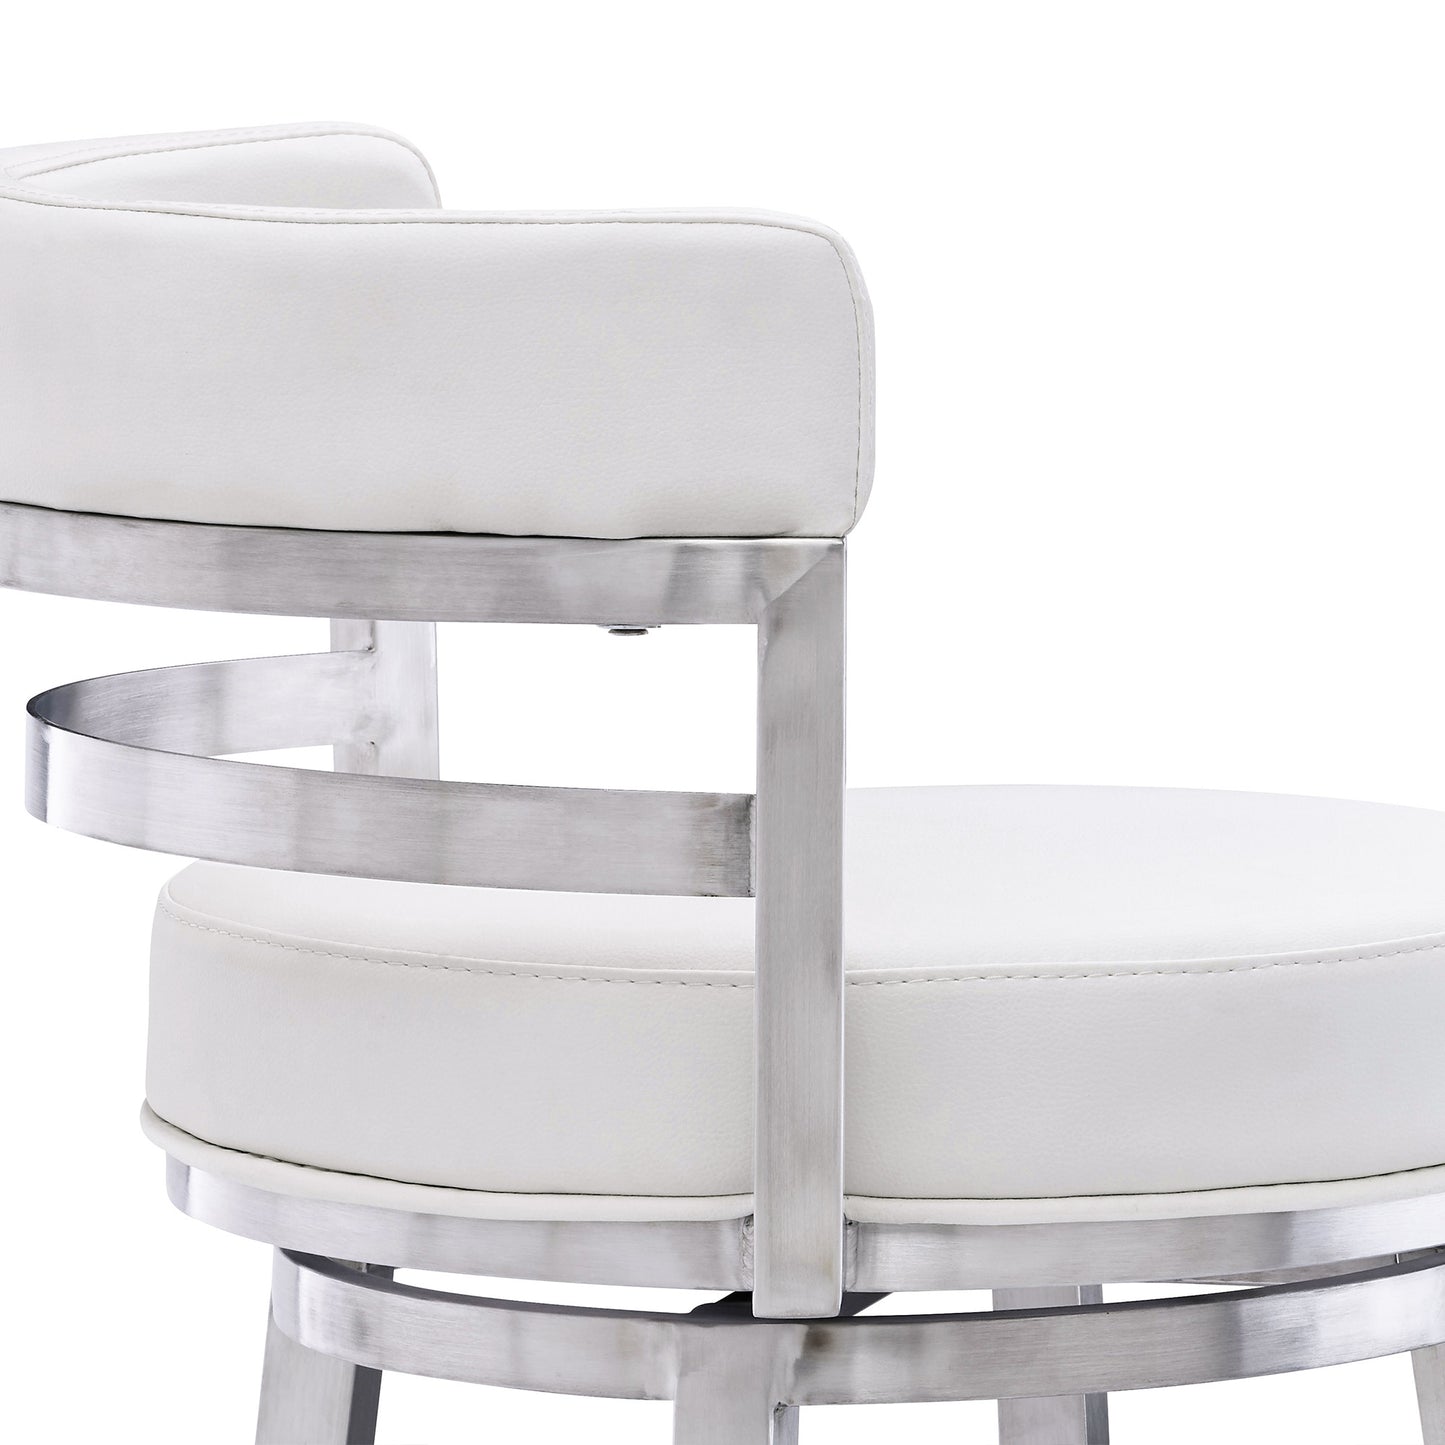 39" White And Silver Faux Leather Swivel Low Back Bar Height Chair With Footrest By Homeroots